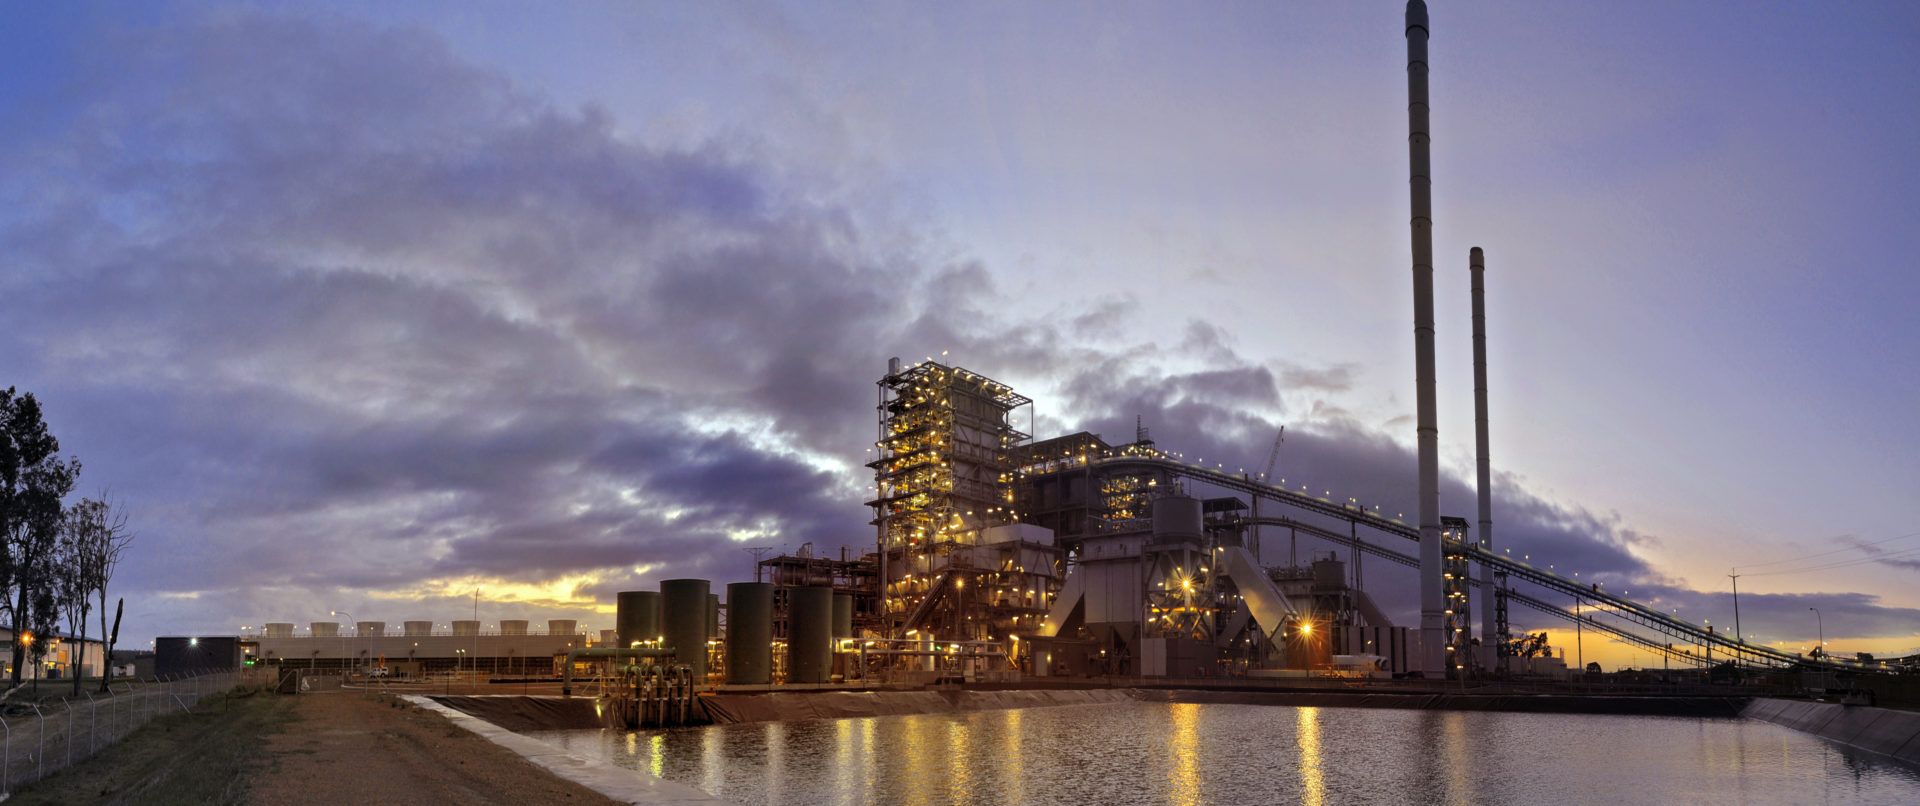 Collie’s Bluewaters Power worthless: Sumitomo